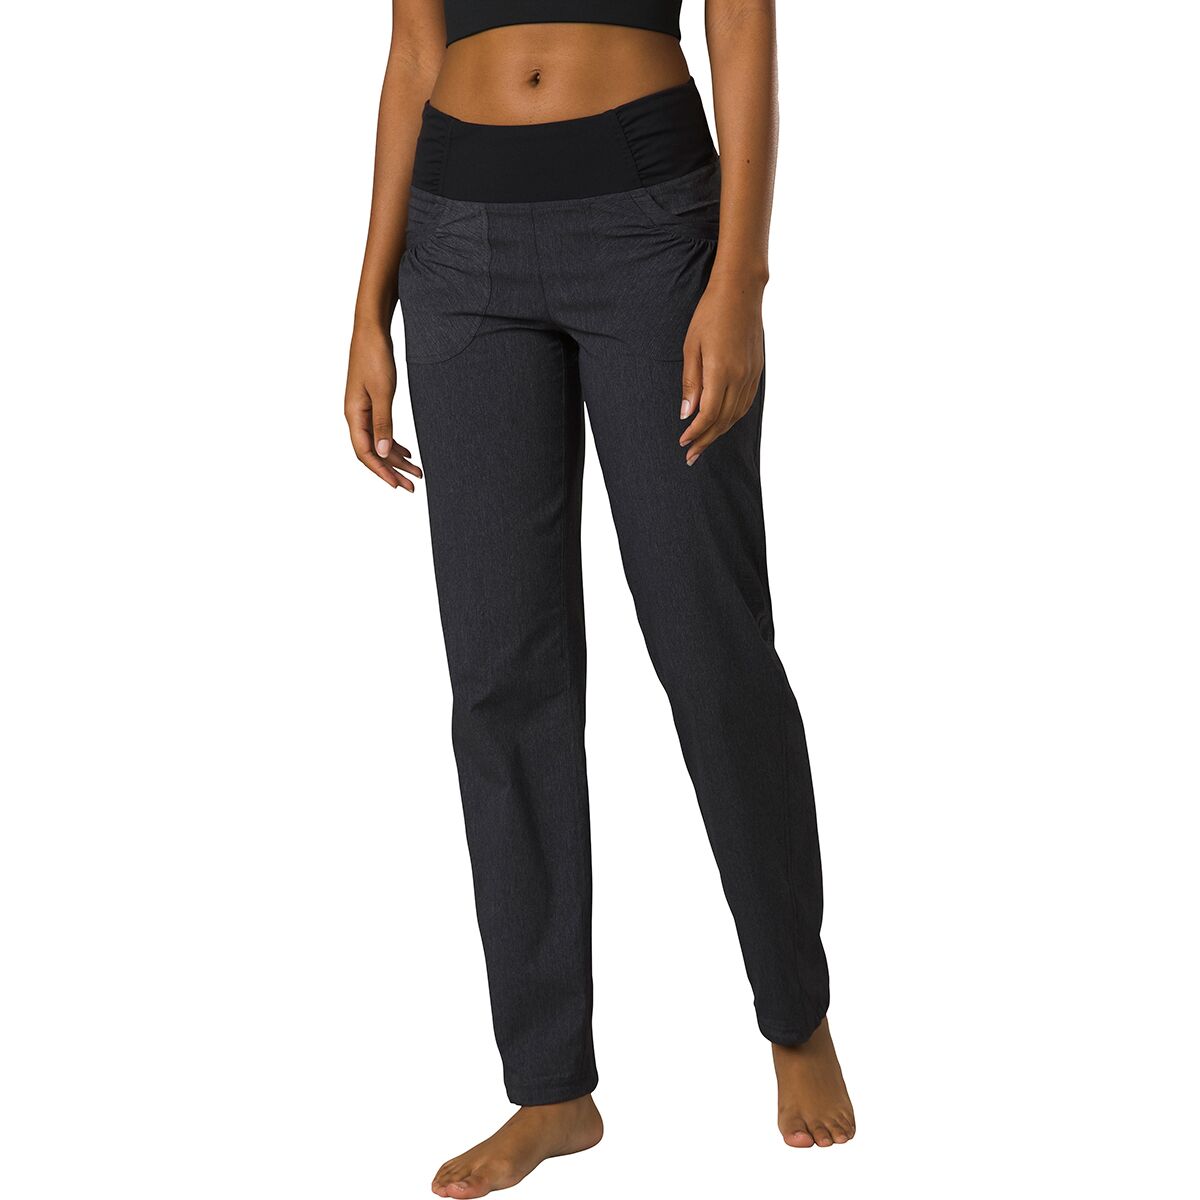 Prana Summit Pant - Casual trousers Women's, Buy online